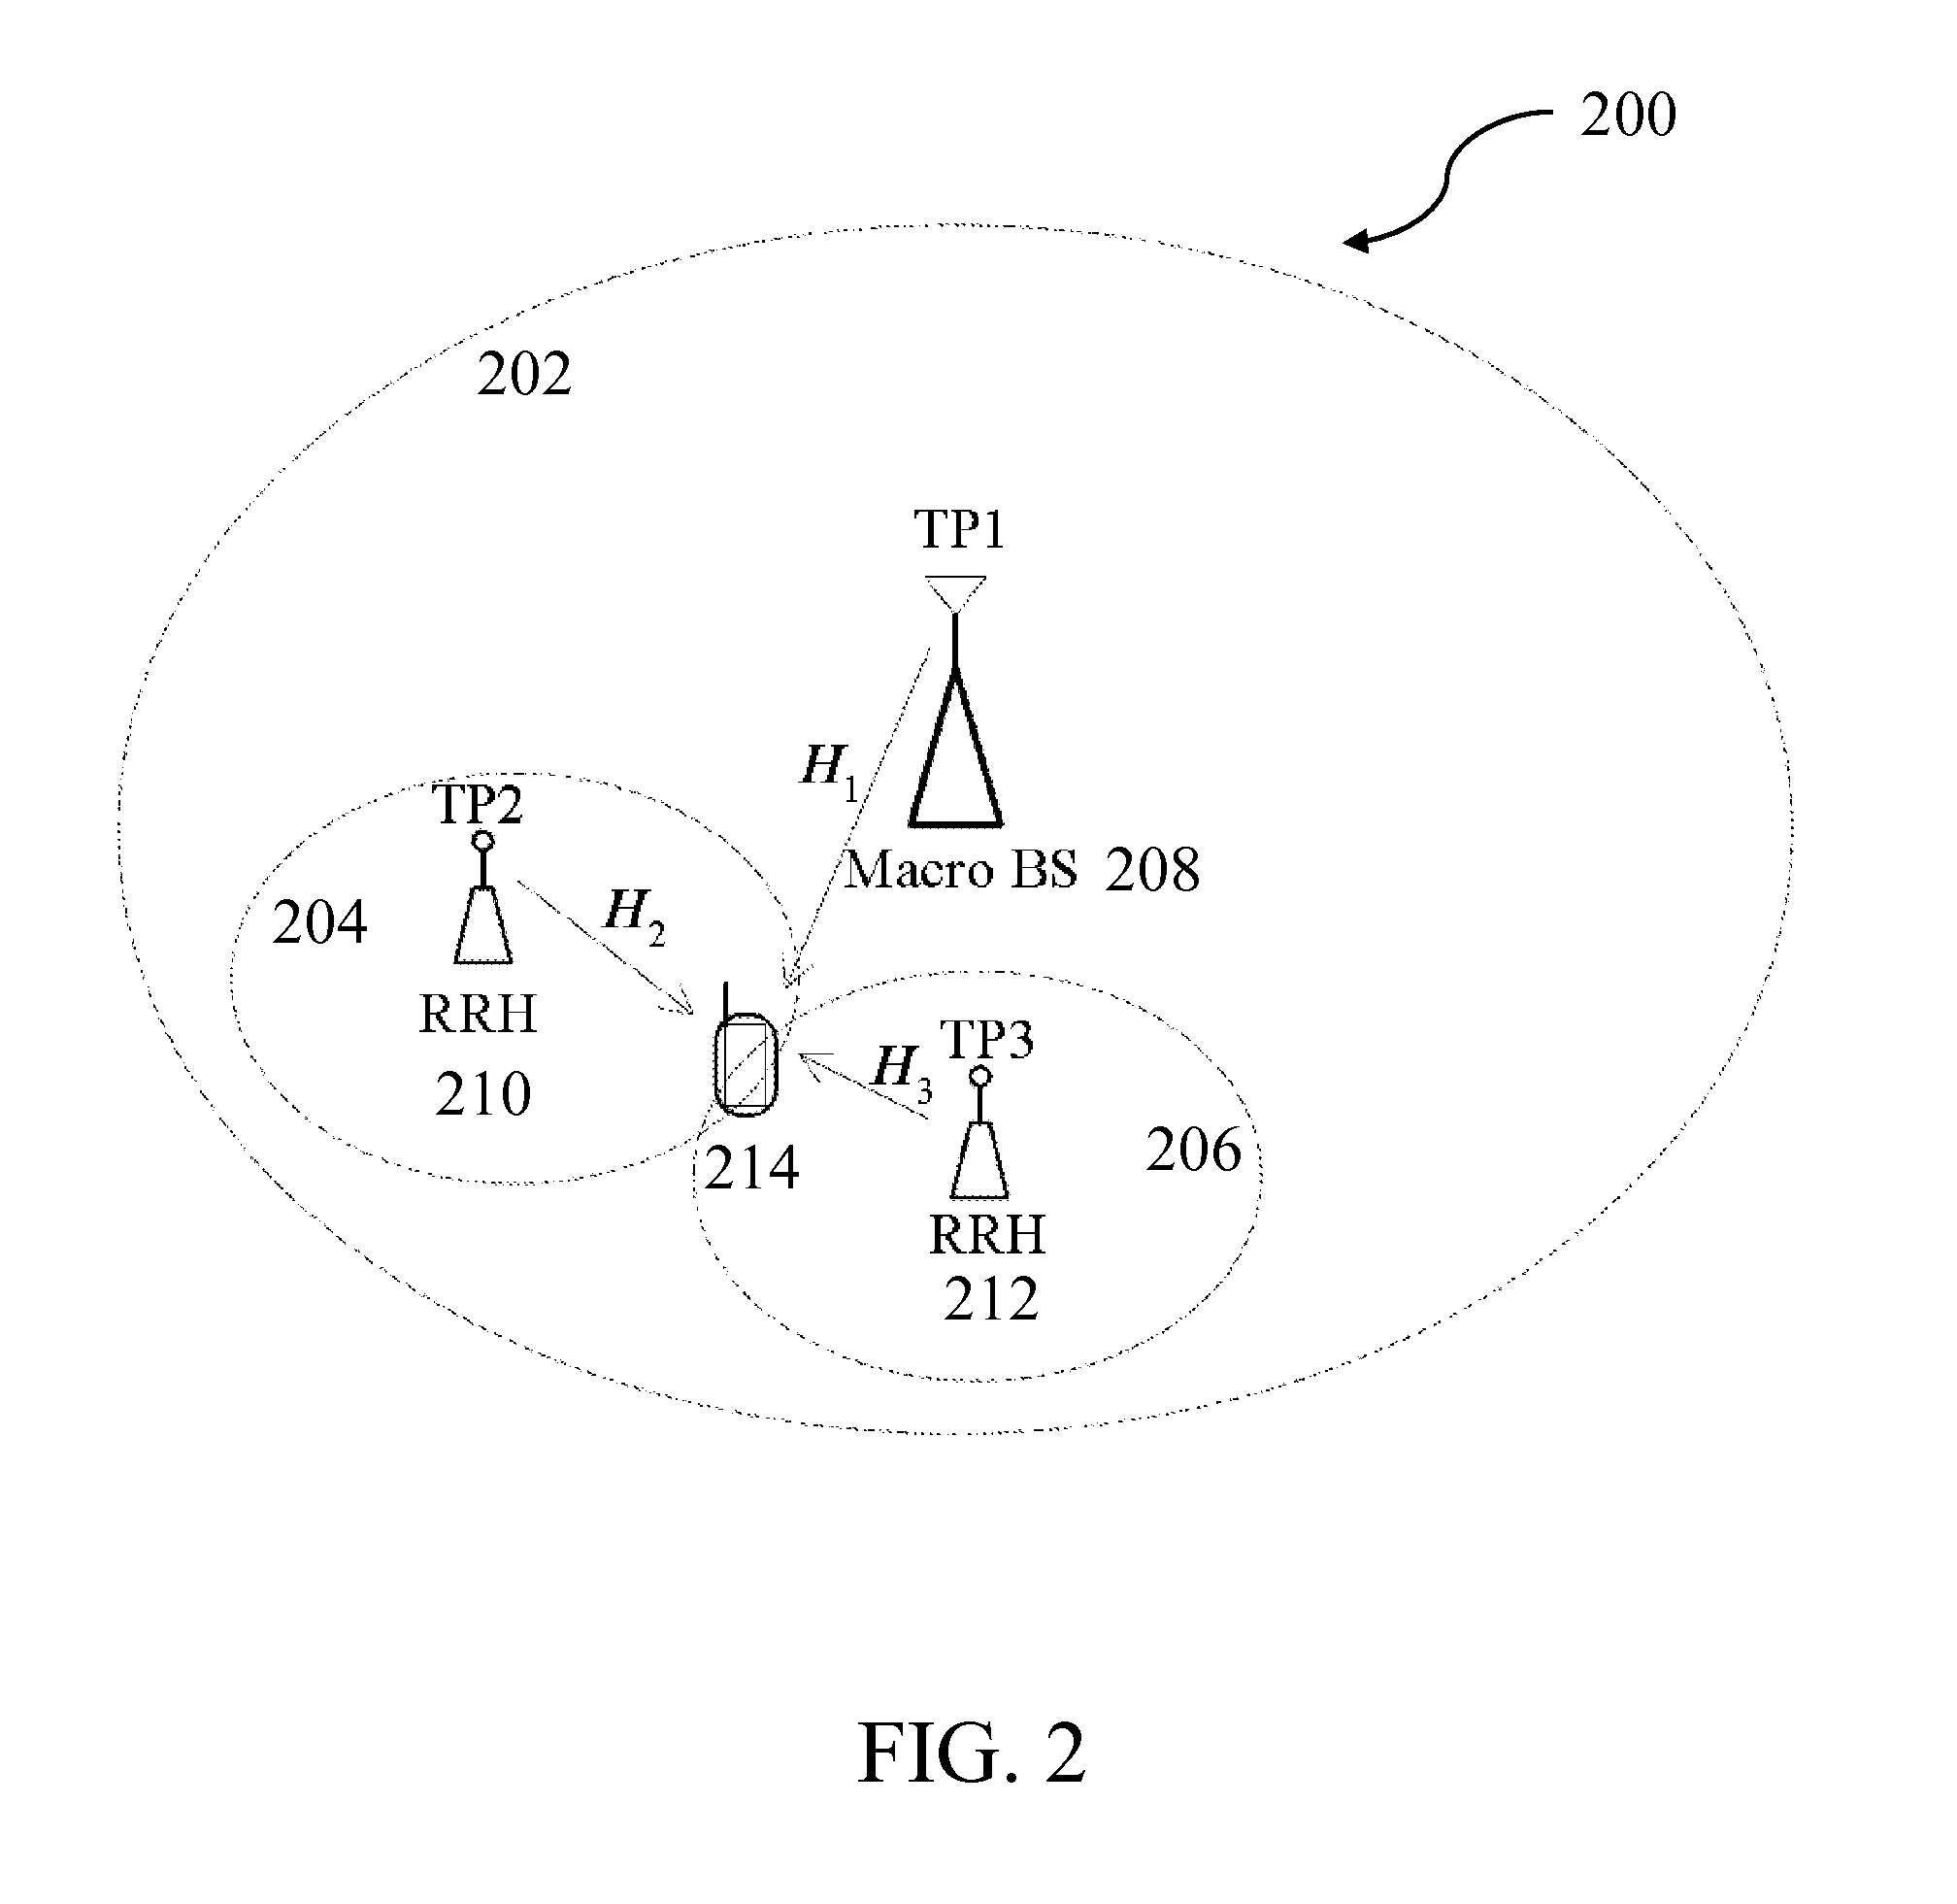 Feedback and Scheduling for Coordinated Multi-Point (CoMP) Joint Transmission (JT) in Orthogonal Frequency Division Multiple Access (OFDMA)